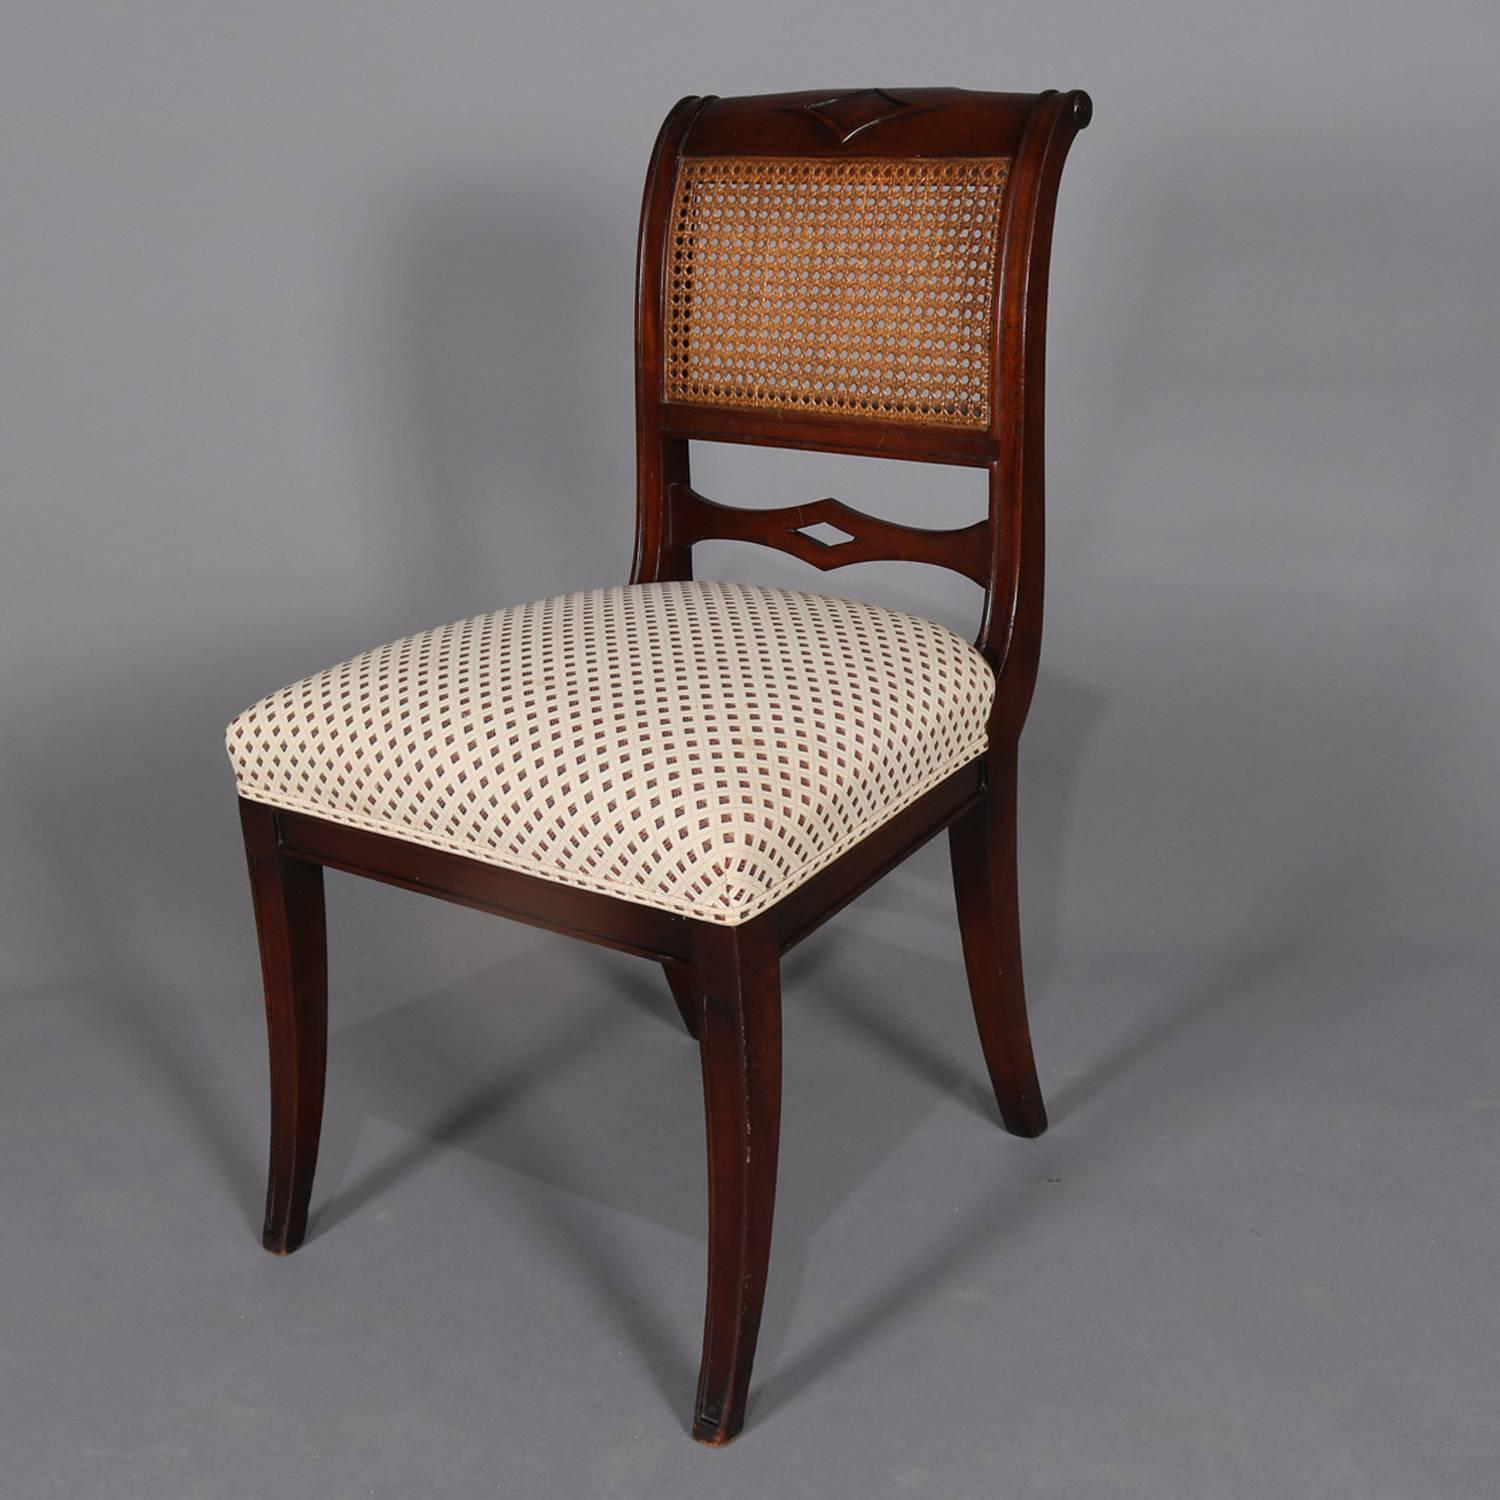 Set of six English Regency dining chairs feature flame mahogany construction with scroll crest having central applied diamond above caned inset and pierced stretcher, upholstered seats raised on flared and tapered legs, 19th century

Measures: 36